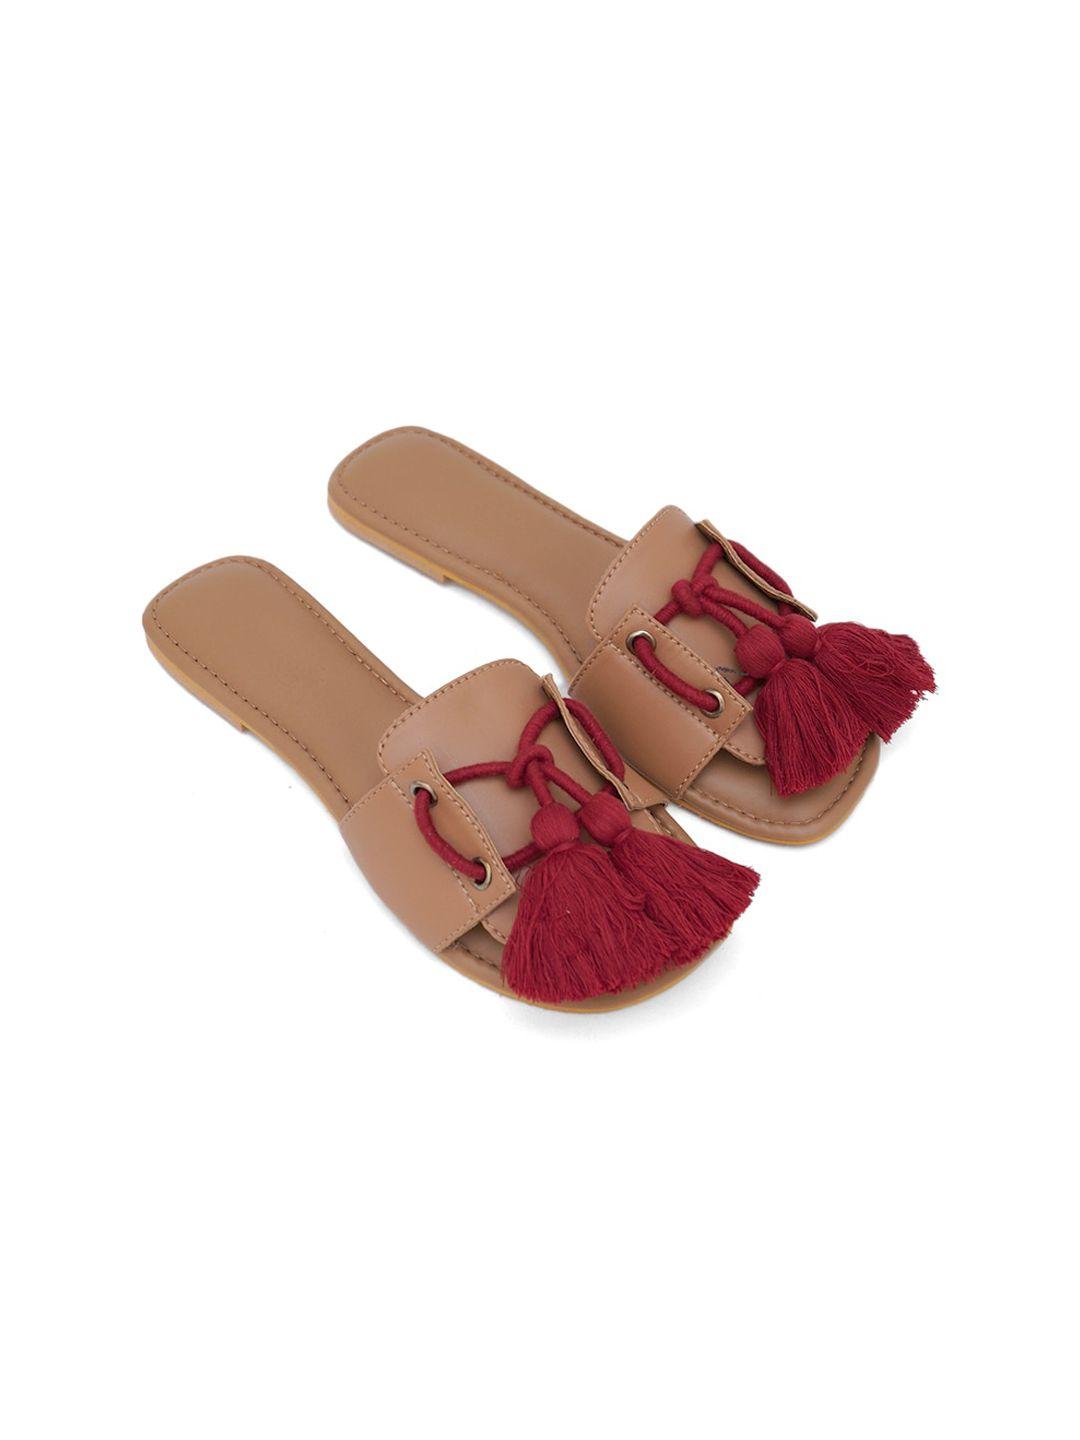 Sole House Women Nude-Coloured Ethnic Open Toe Flats With Tassels